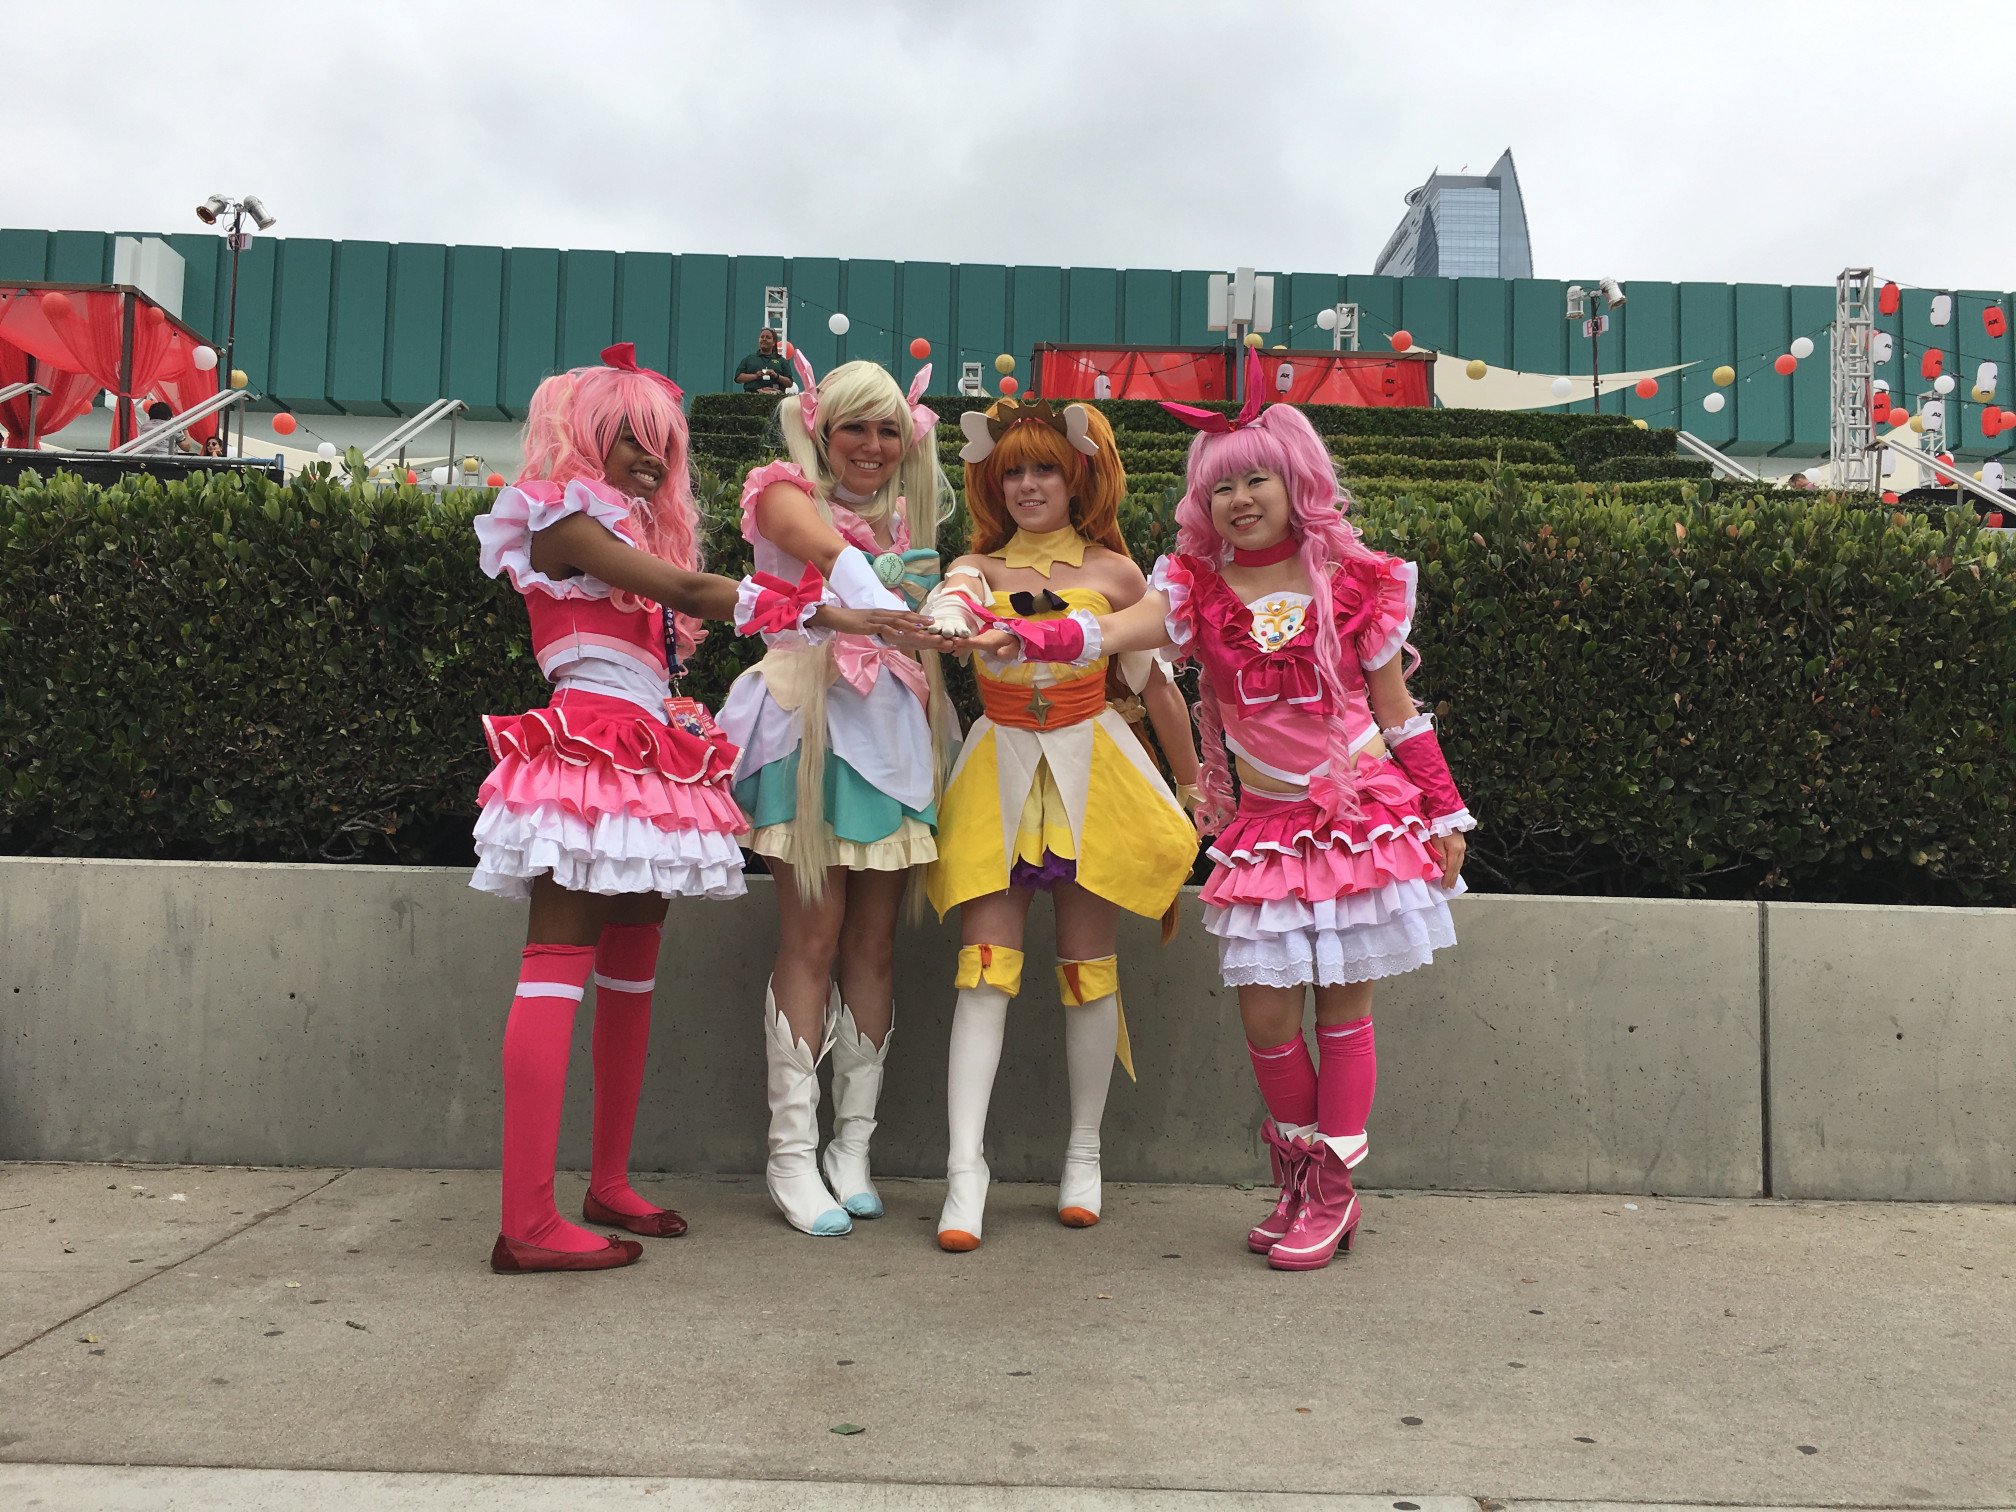 Maria 🍇⚡️ on Twitter: "Pretty Cure/Glitter cosplay gathering! (1/2) #AX2019 https://t.co/WKJYXXpP38" / Twitter